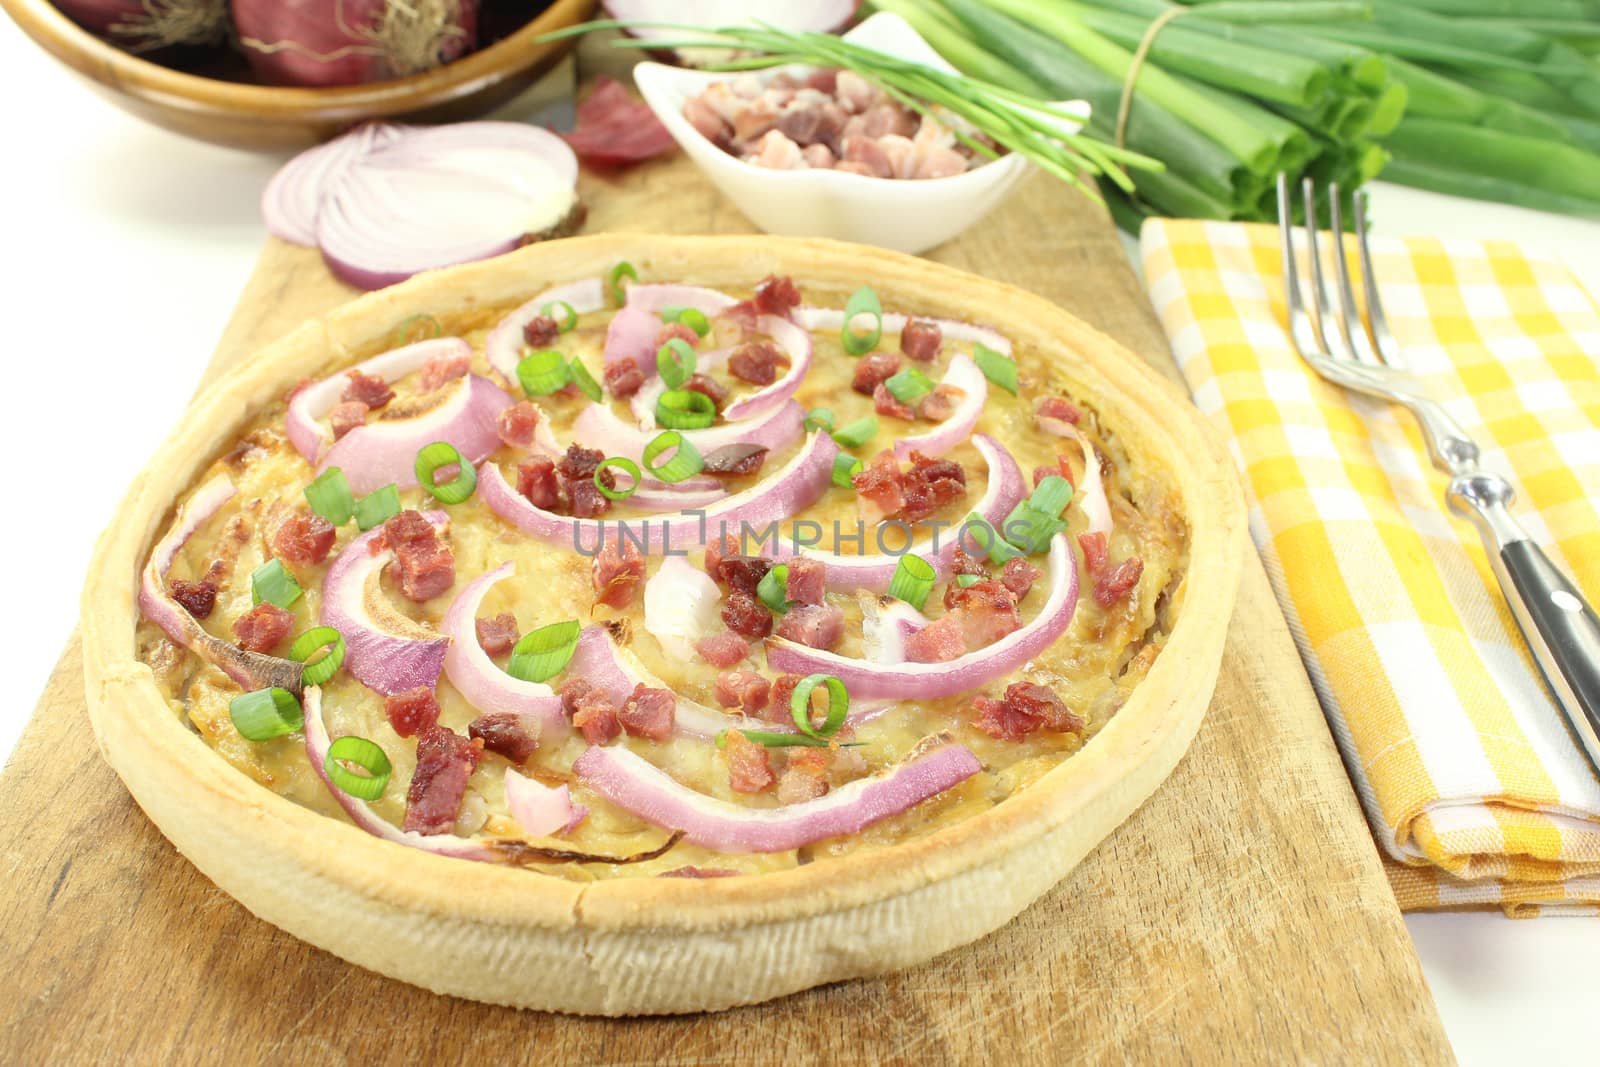 Onion tart with bacon on a light background